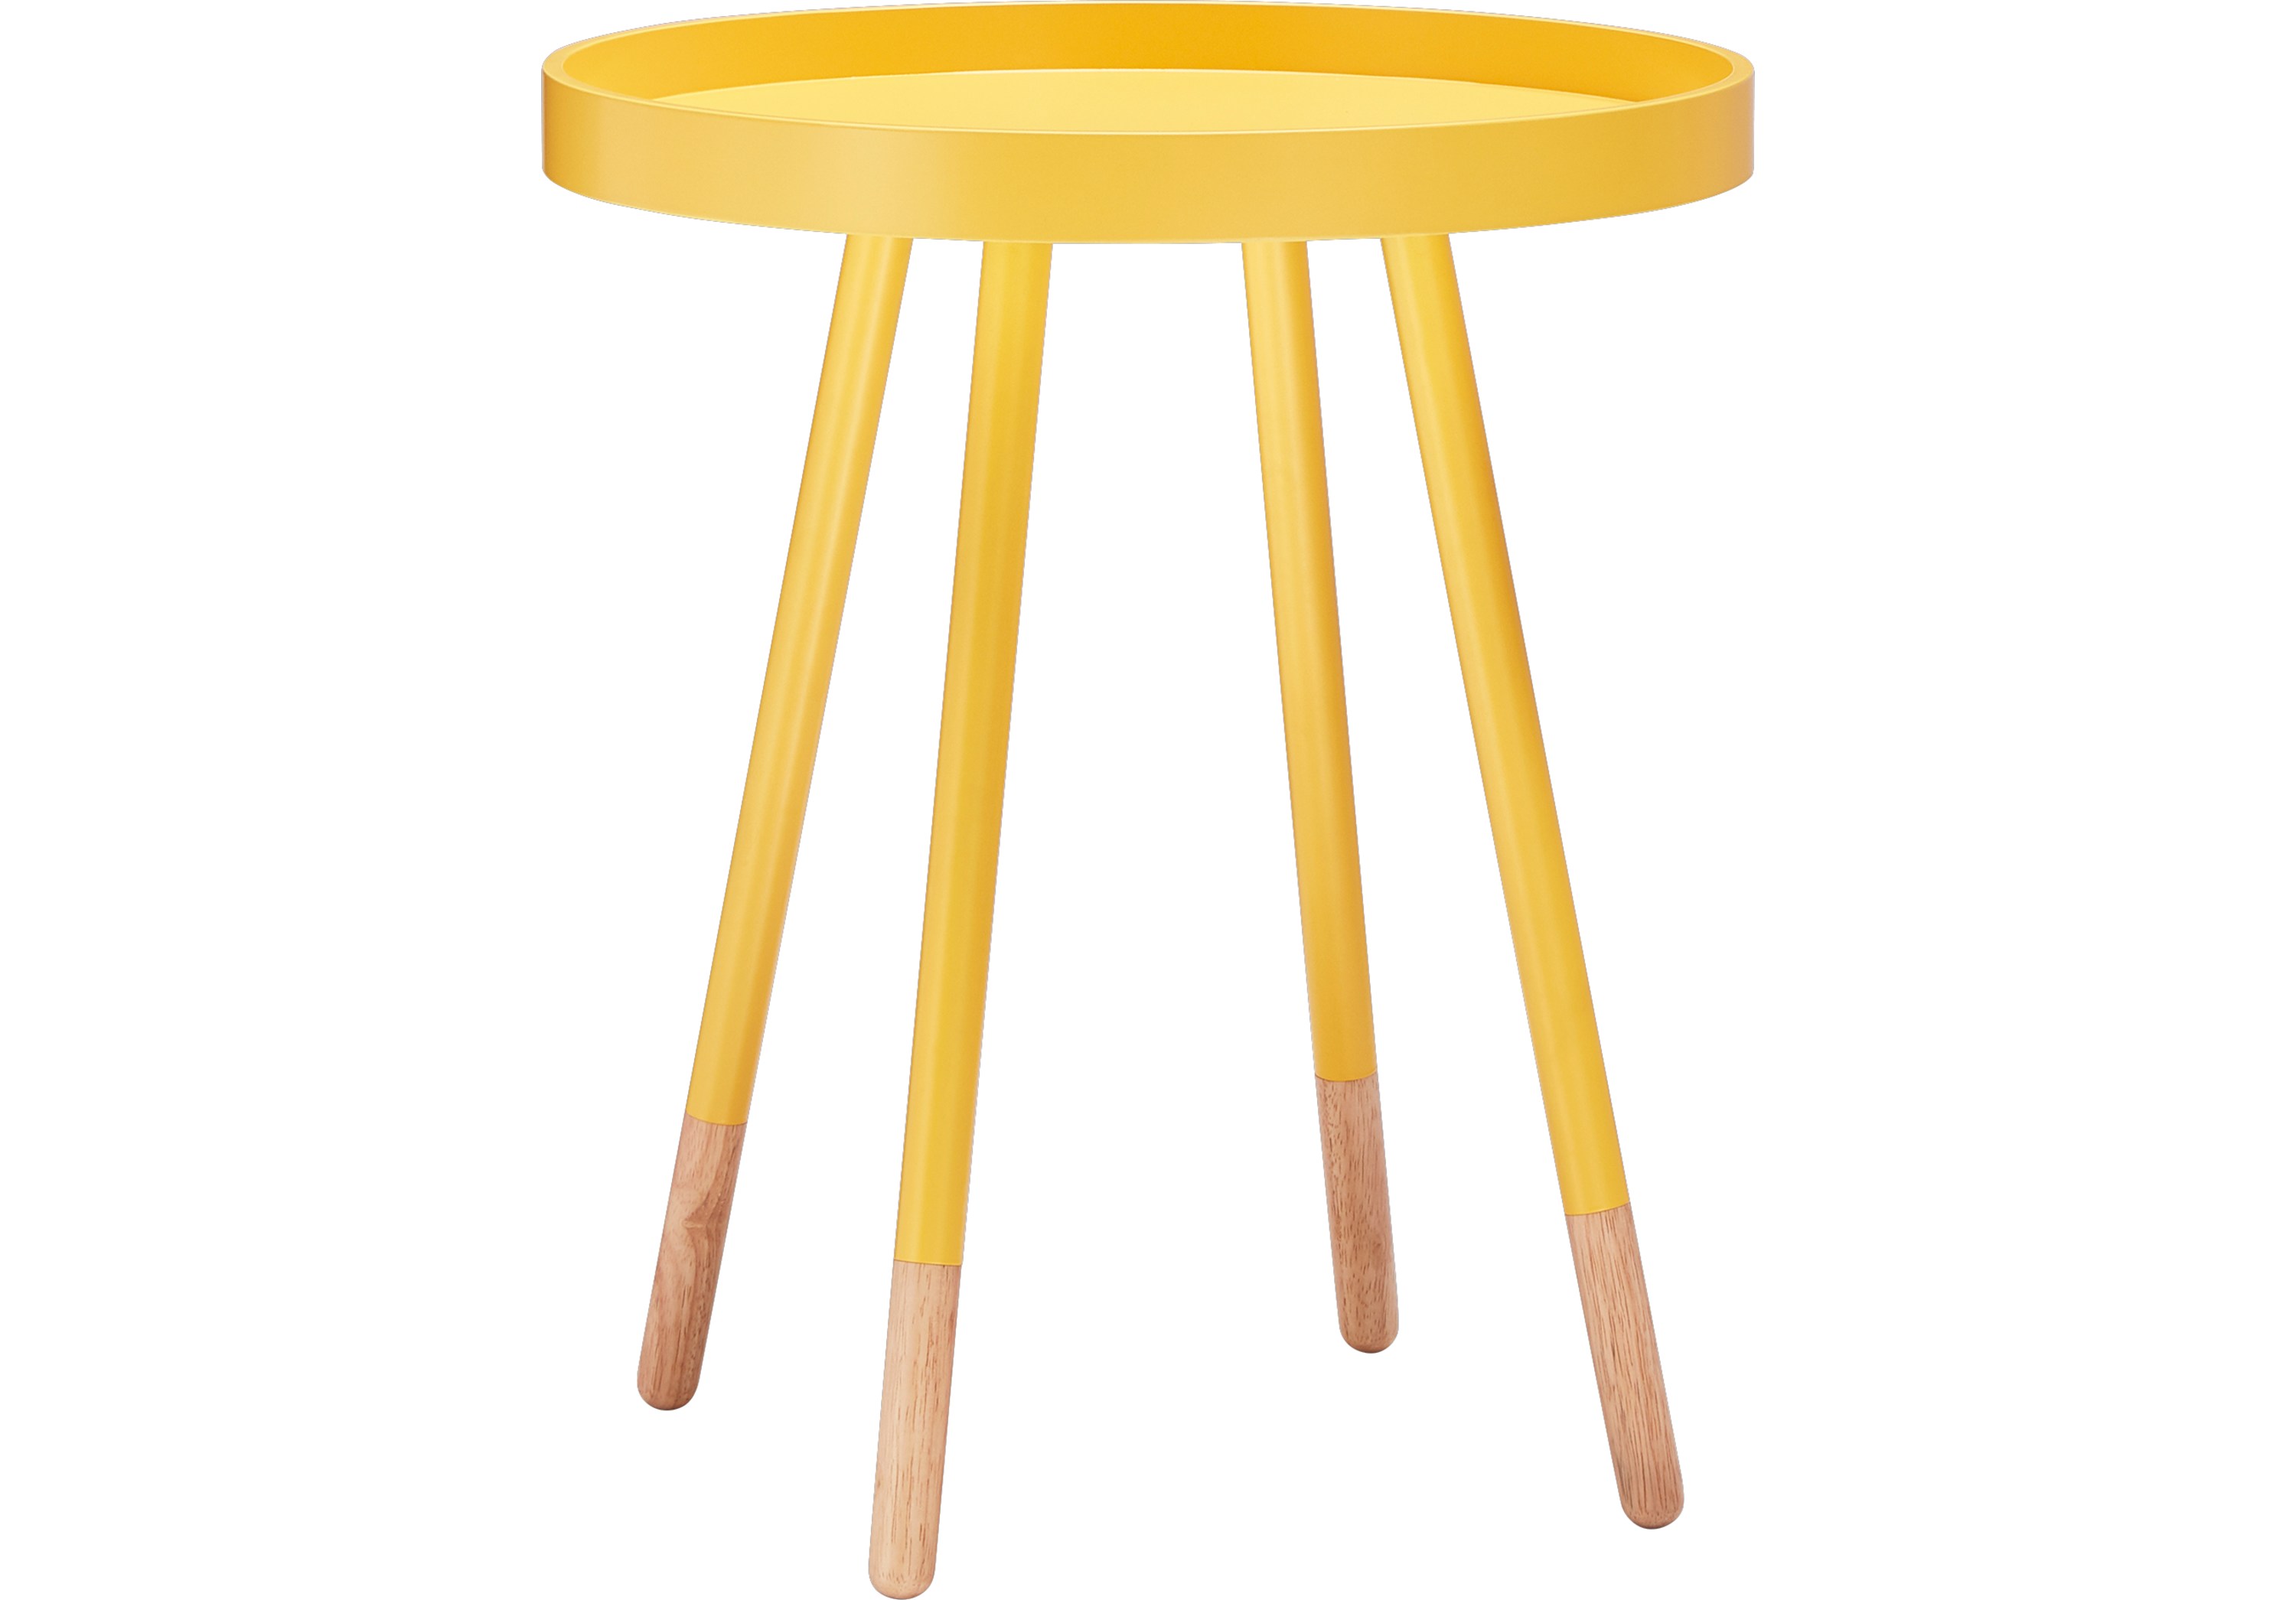 sibley lane yellow accent table items colors sibleylane outdoor roll over zoom clearance and chairs ikea lamp shades twisted wood side gold glass top coffee farmhouse sauder